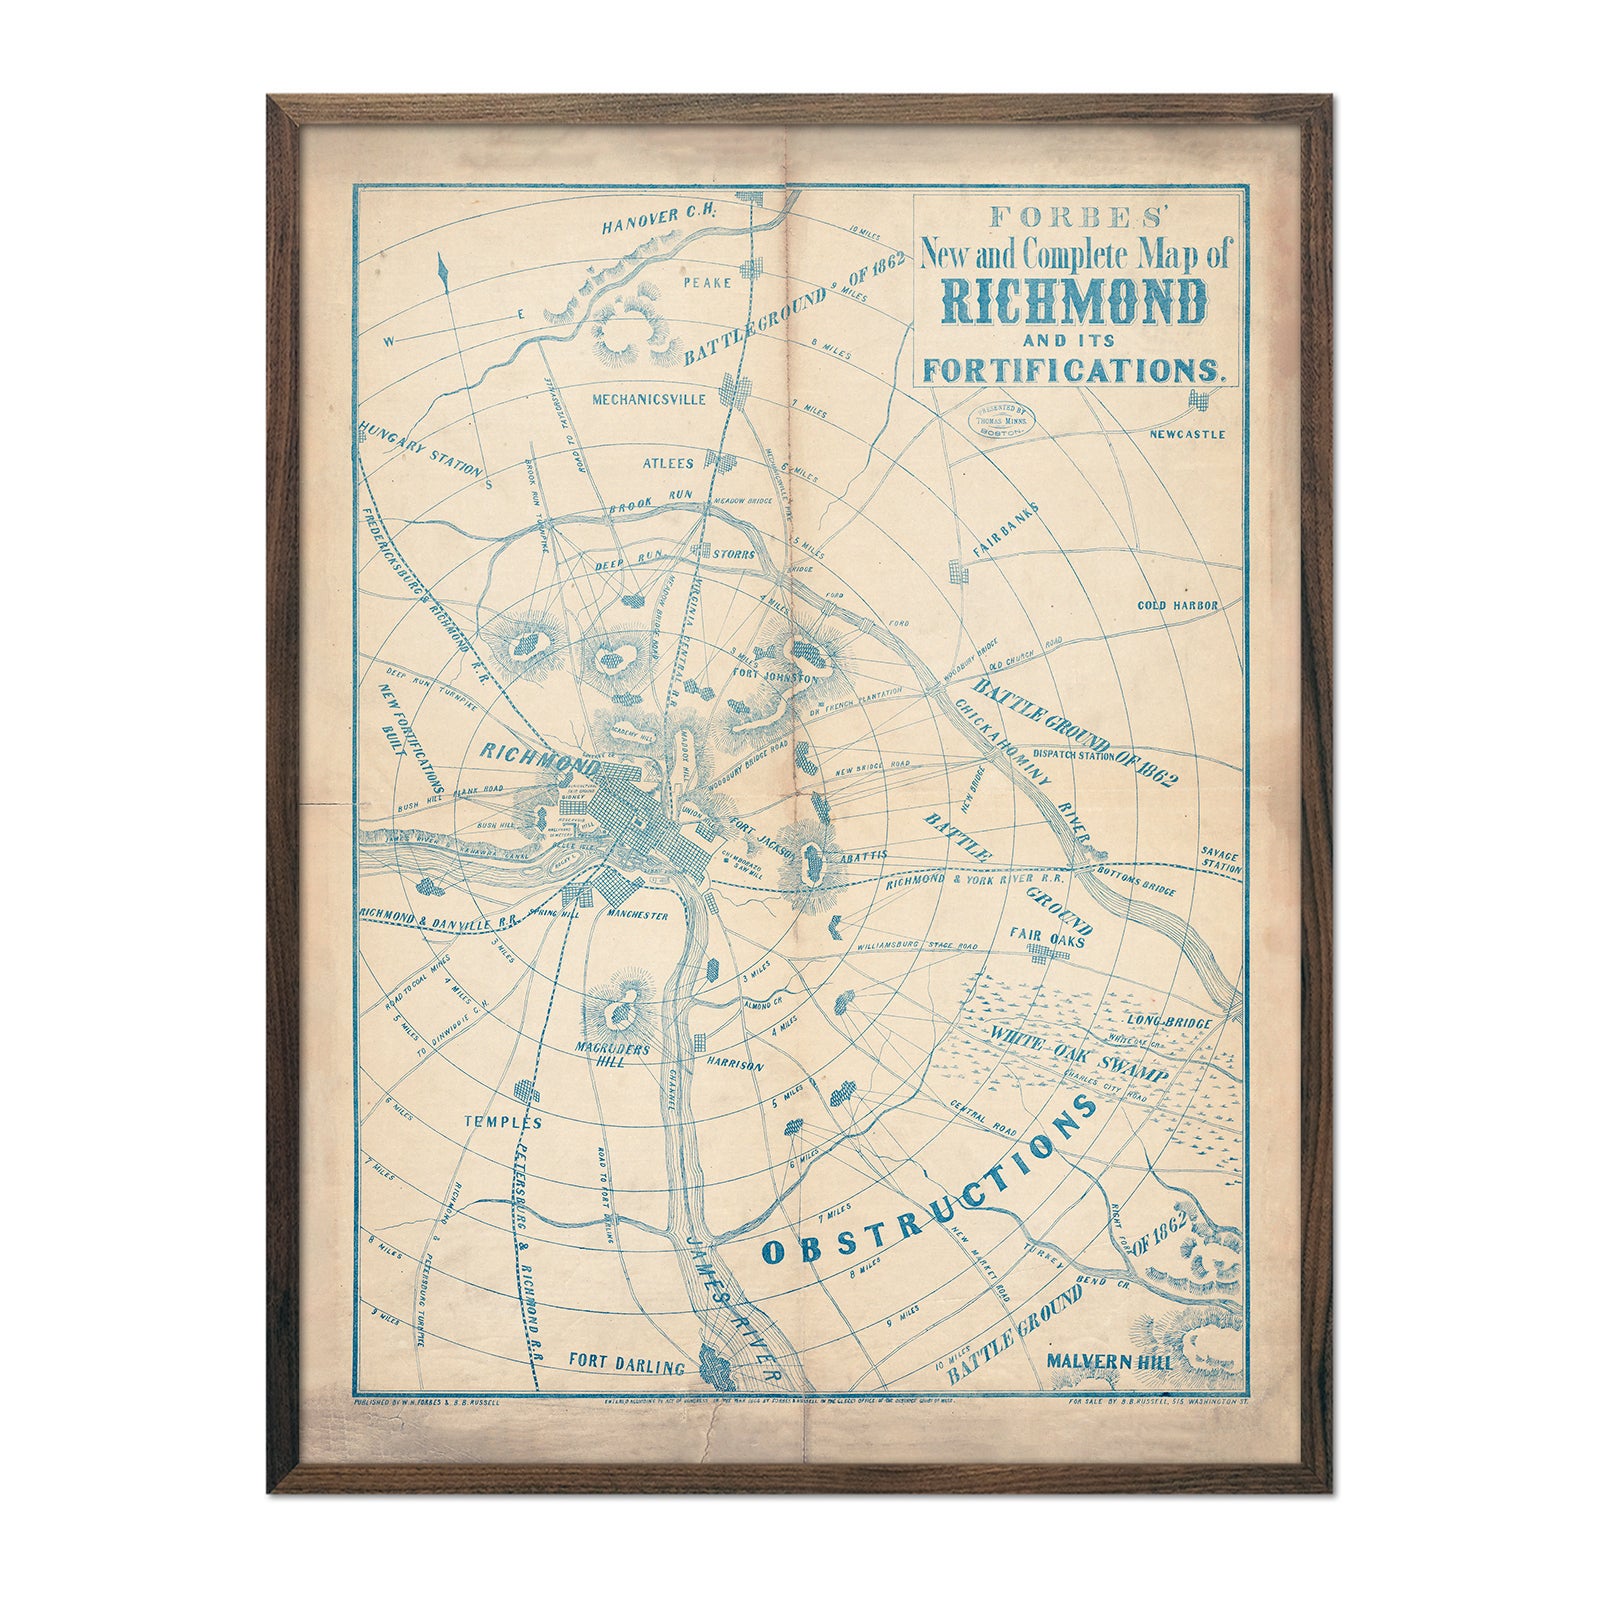 Forbes' New and Complete Map of Richmond and Its Fortifications